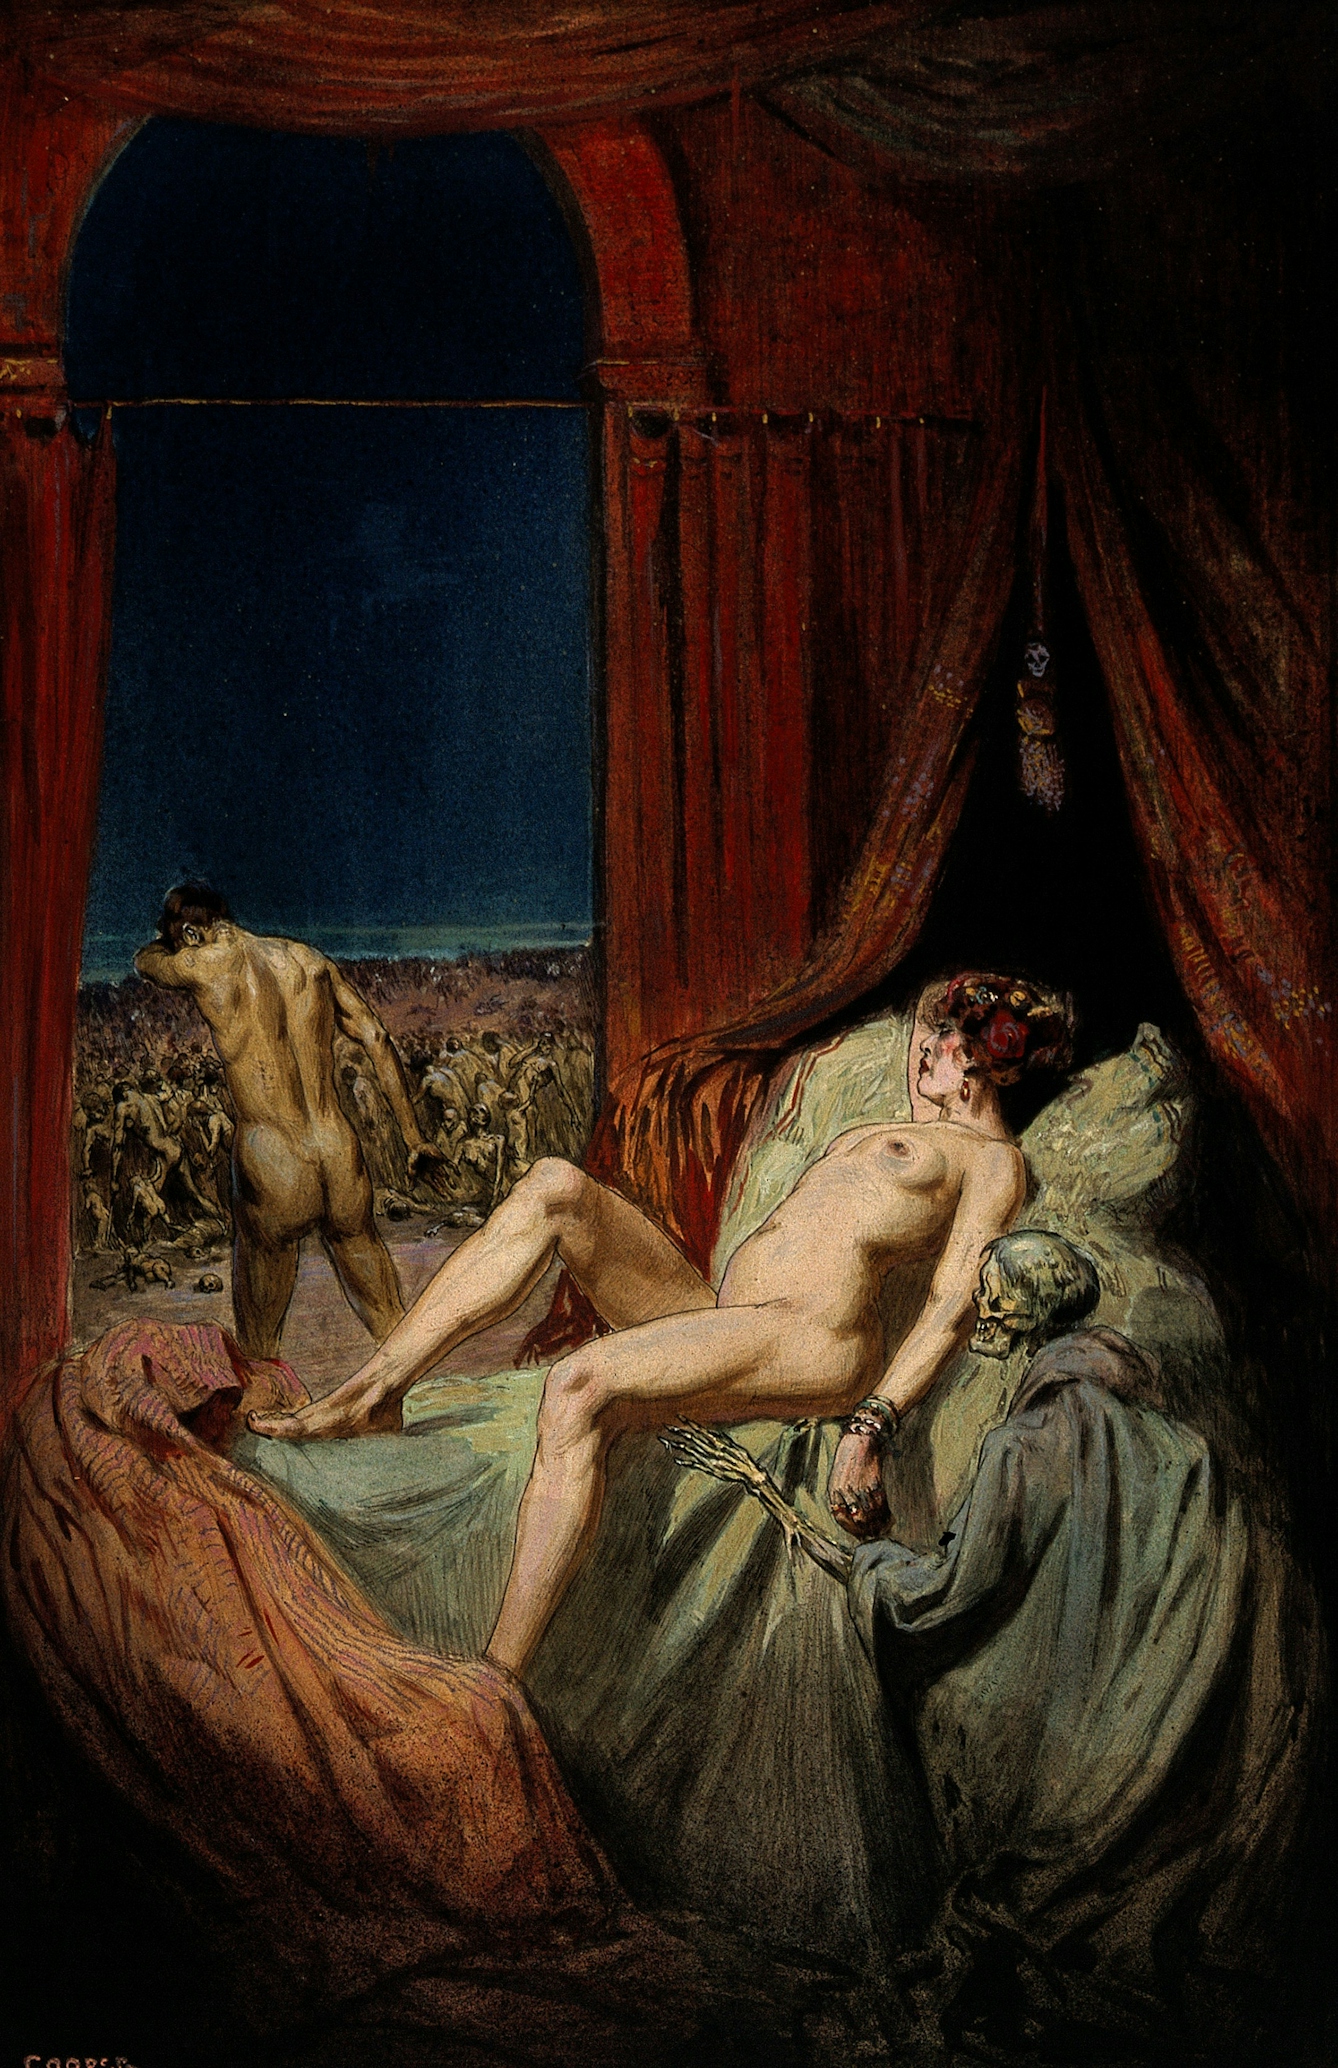 Early 20th-century painting depicting syphilis, Richard Tennant Cooper.